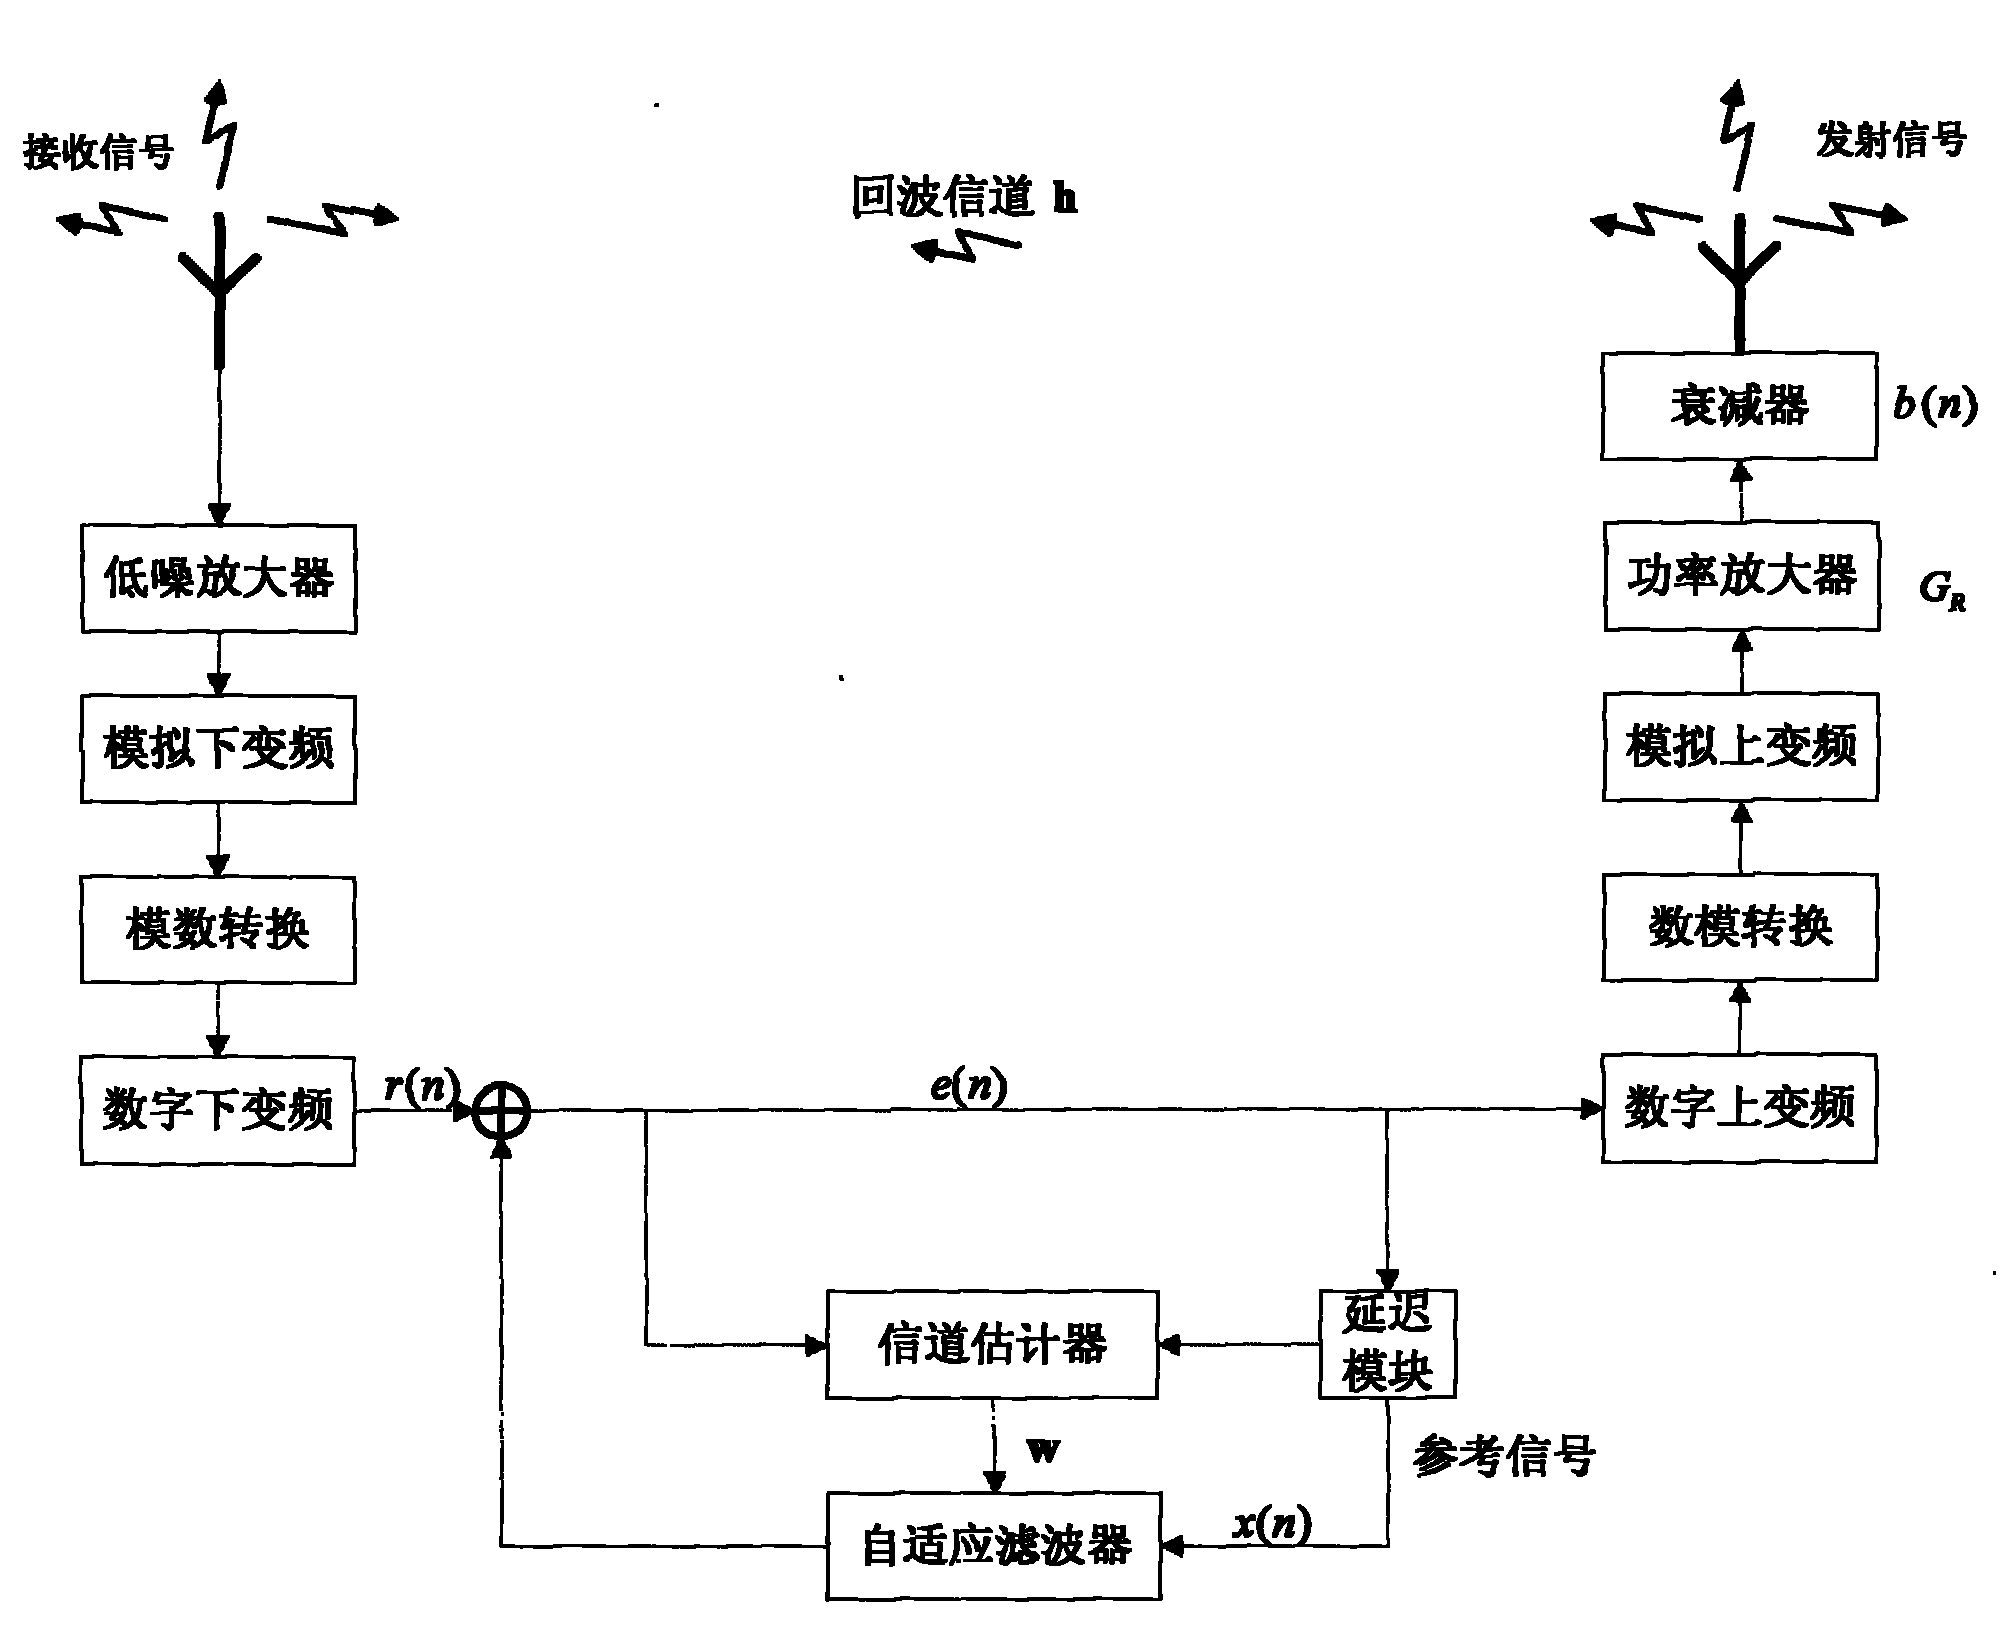 Power control based fast convergence adaptive method in internet connection sharing (ICS) repeater